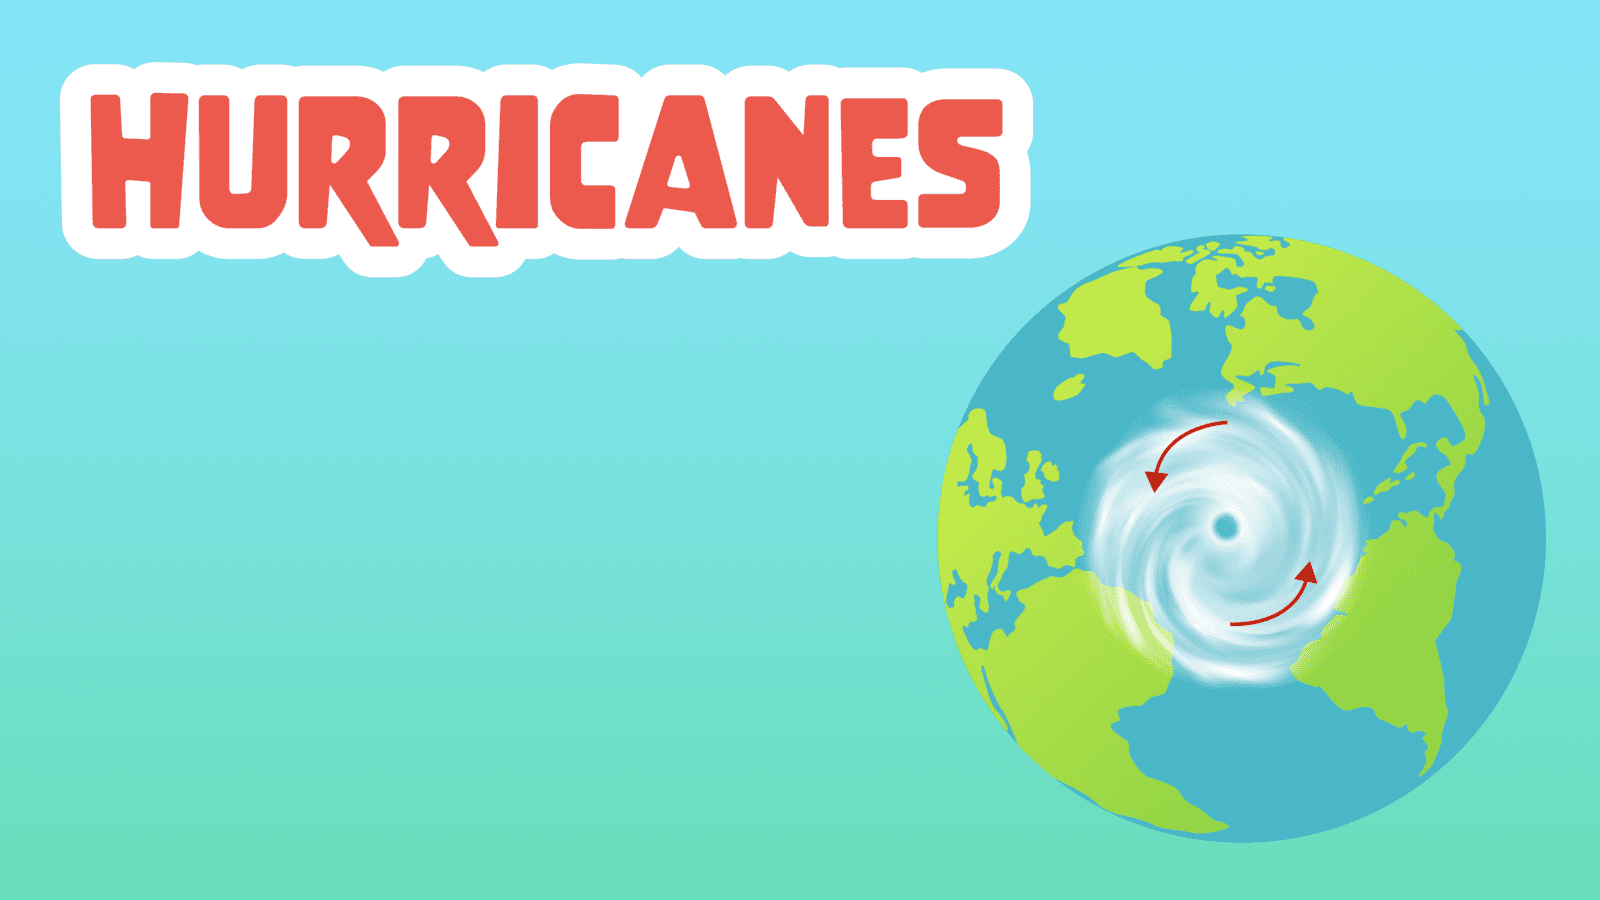 Hurricanes – 5 Interesting Facts about Hurricanes